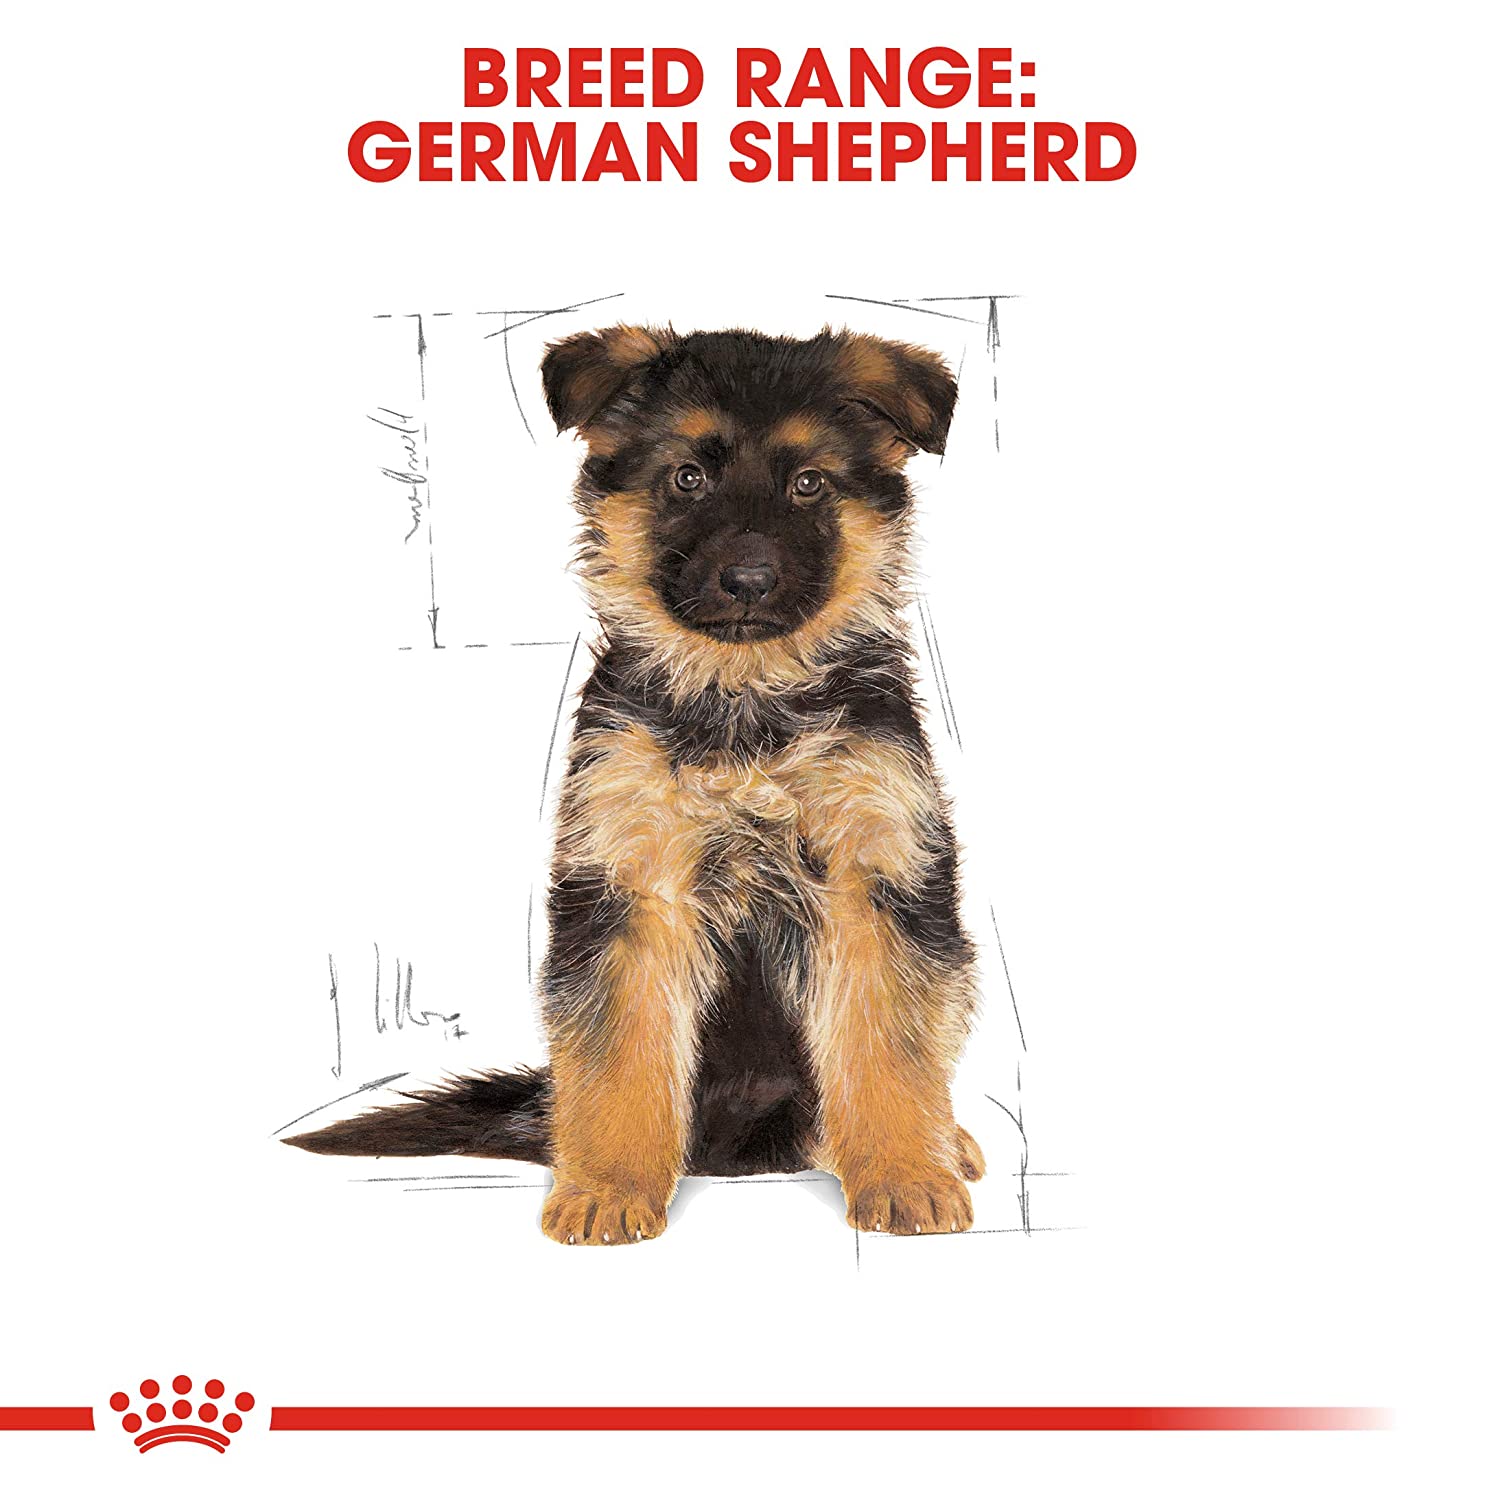 Royal Canin German Shephard Puppy Dry Food (2-15 months)